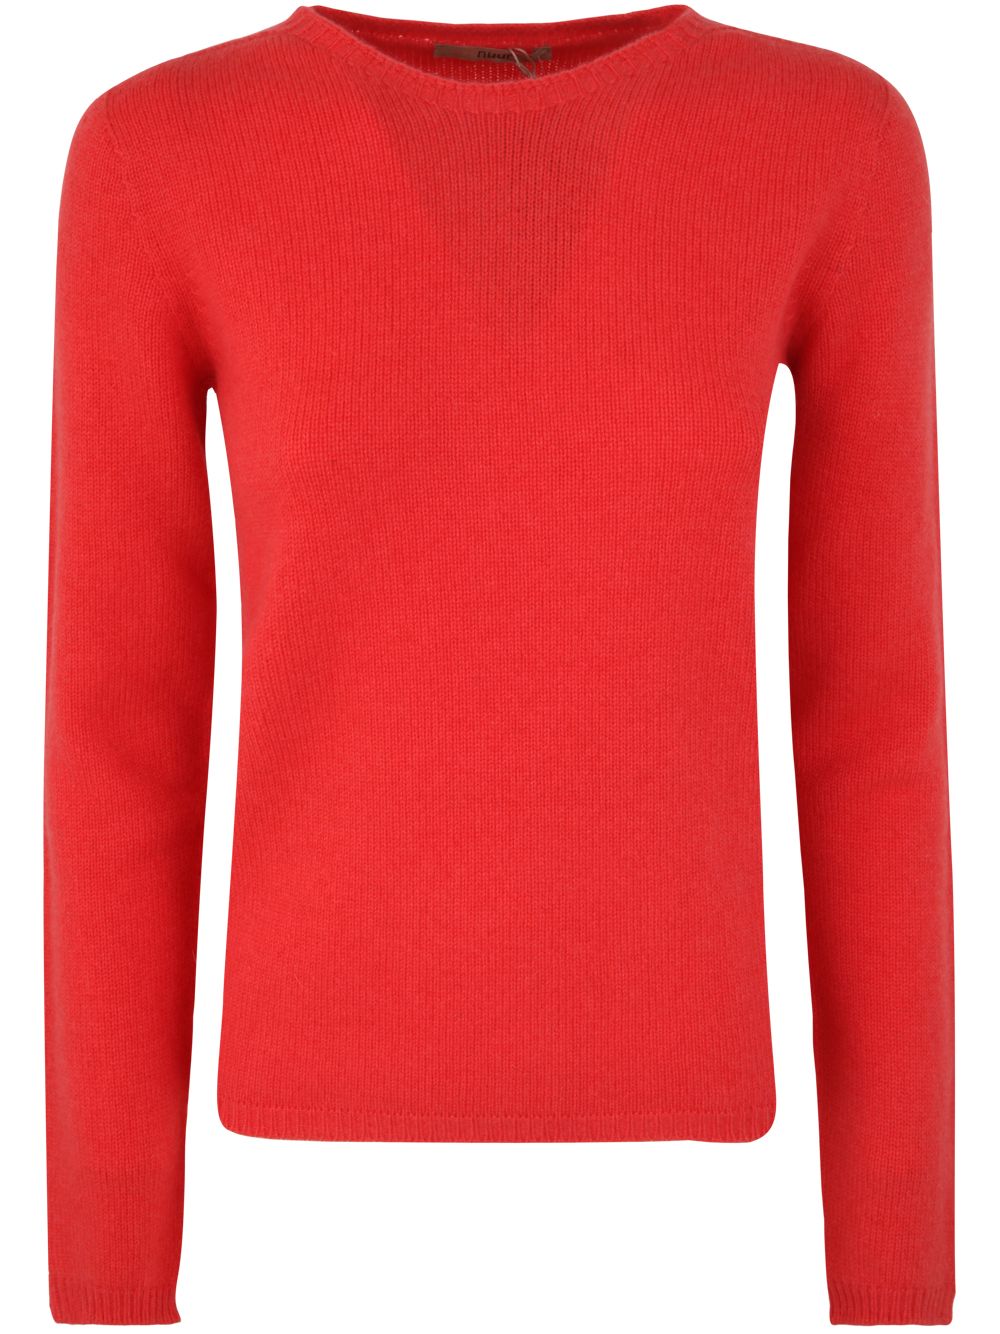 Shop Nuur Crew Neck Sweater In Red